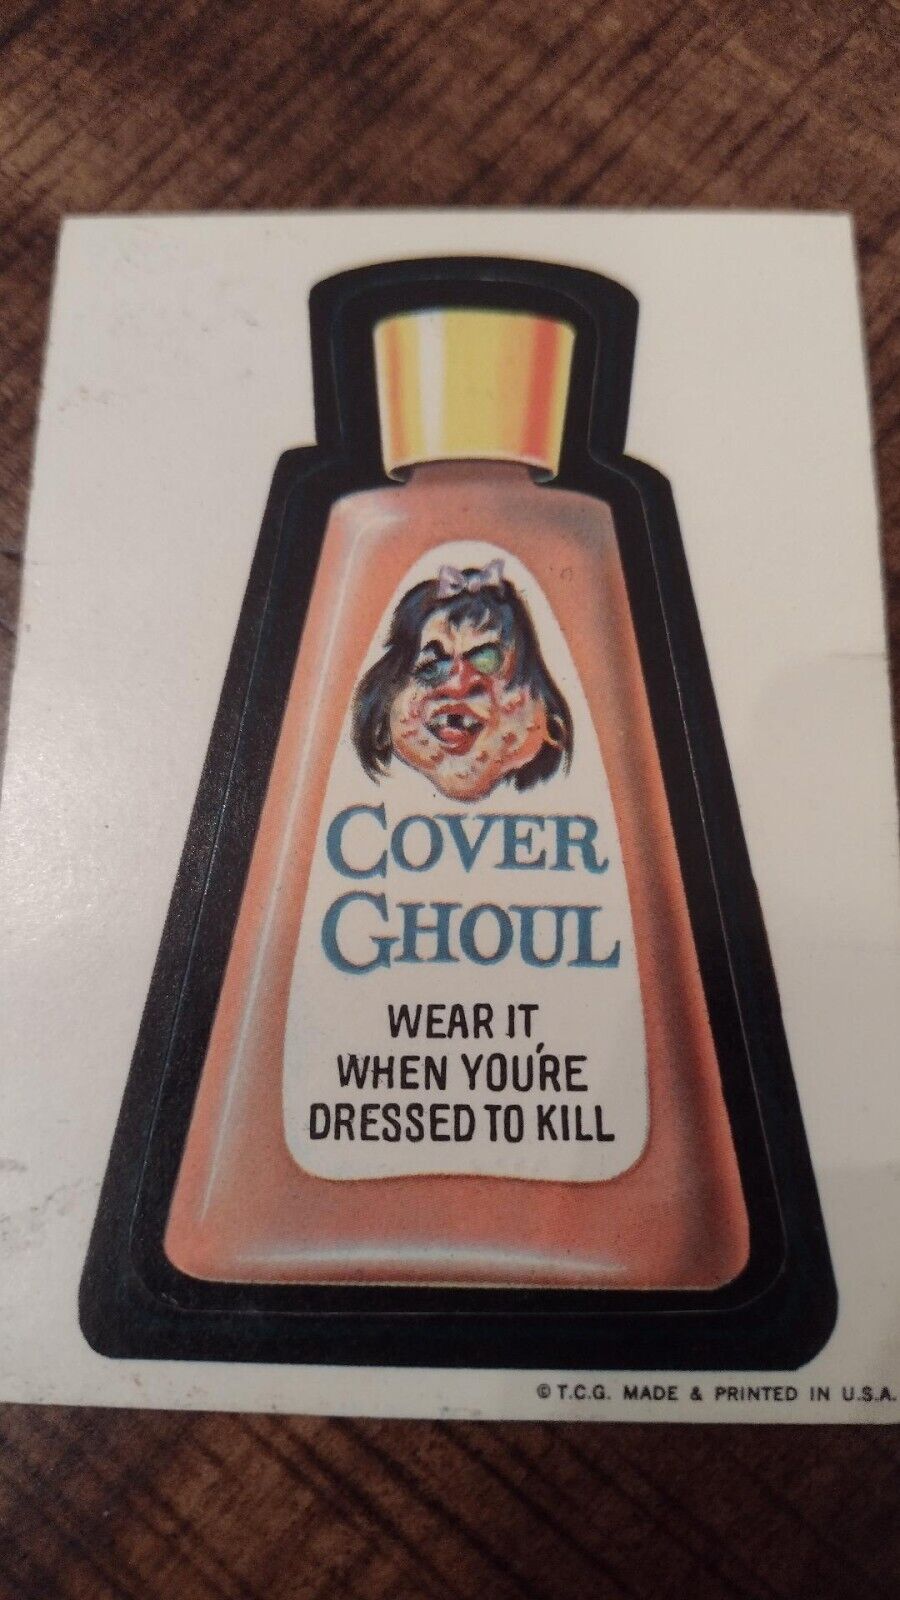 1967 Topps Wacky Packages series 1 Cover Ghoul card # 29